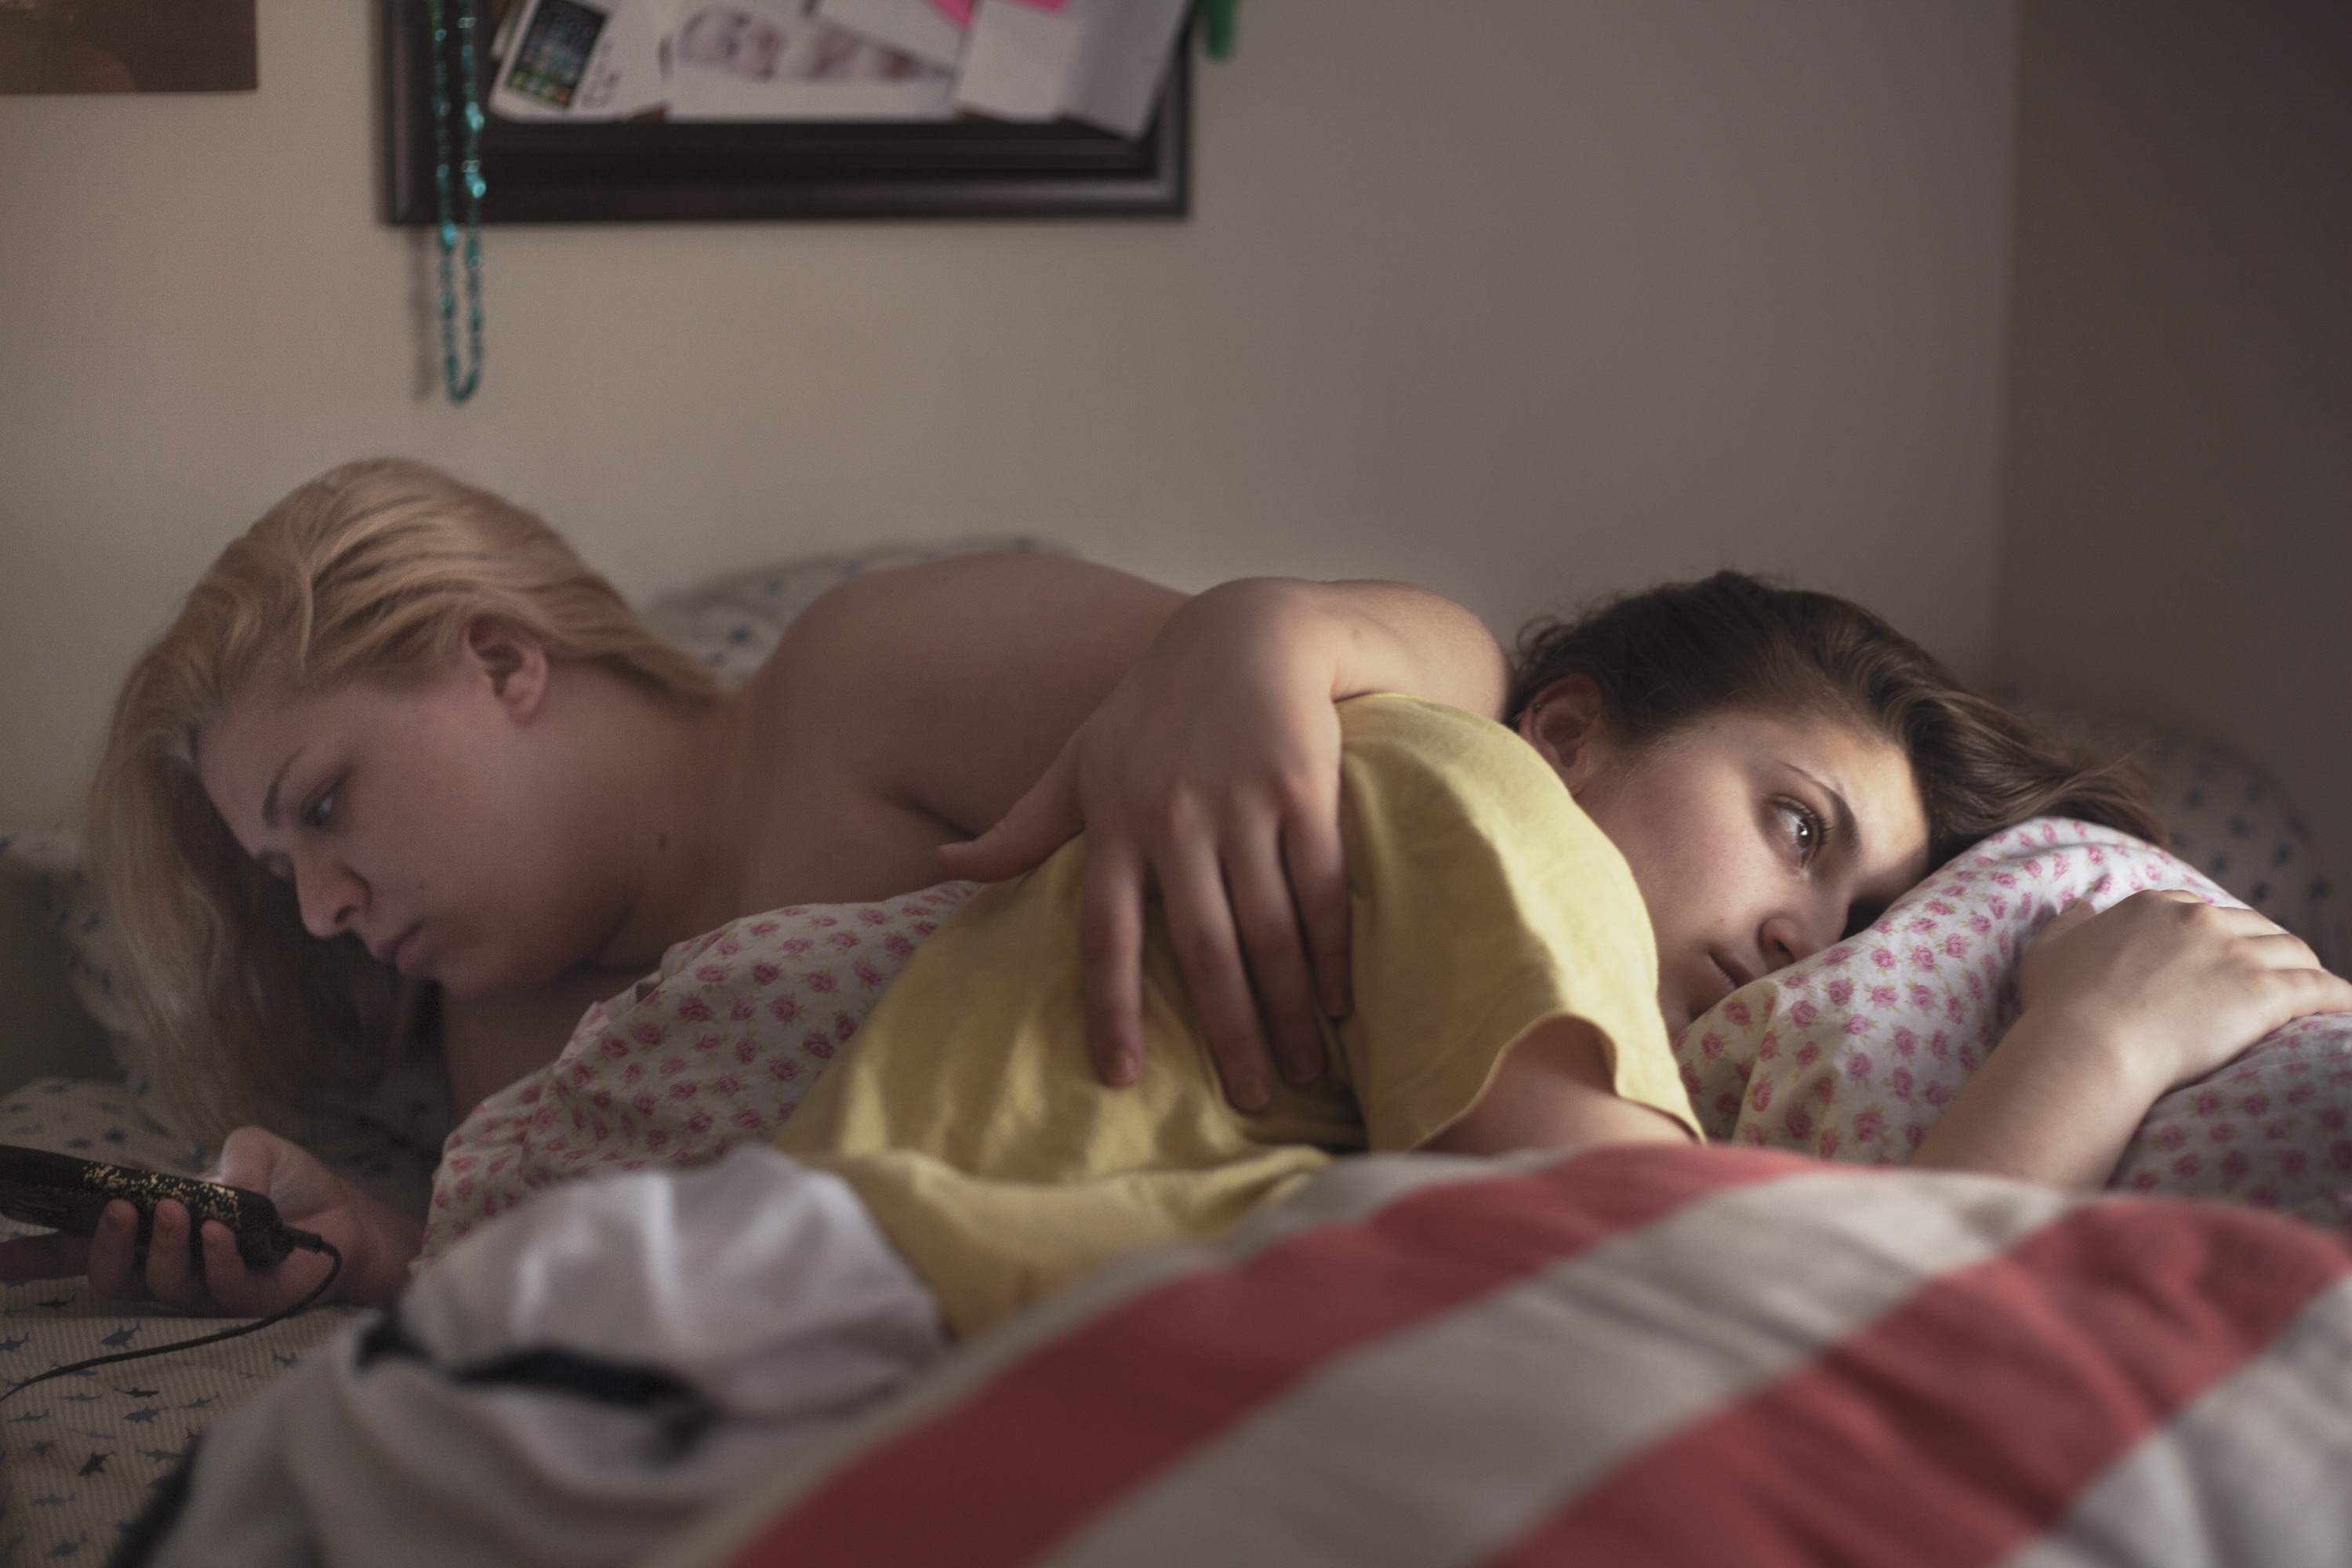 Hannah Kanik, 20, checks her phone while her girlfriend, Courtney DiStasio, 20, looks out the window when they wake up in the morning. Courtney and Hannah’s relationship have been both affirming to one another, but Hannah’s turbulent lifestyle leaves Courtney drained sometimes. Photo by Evan Ortiz